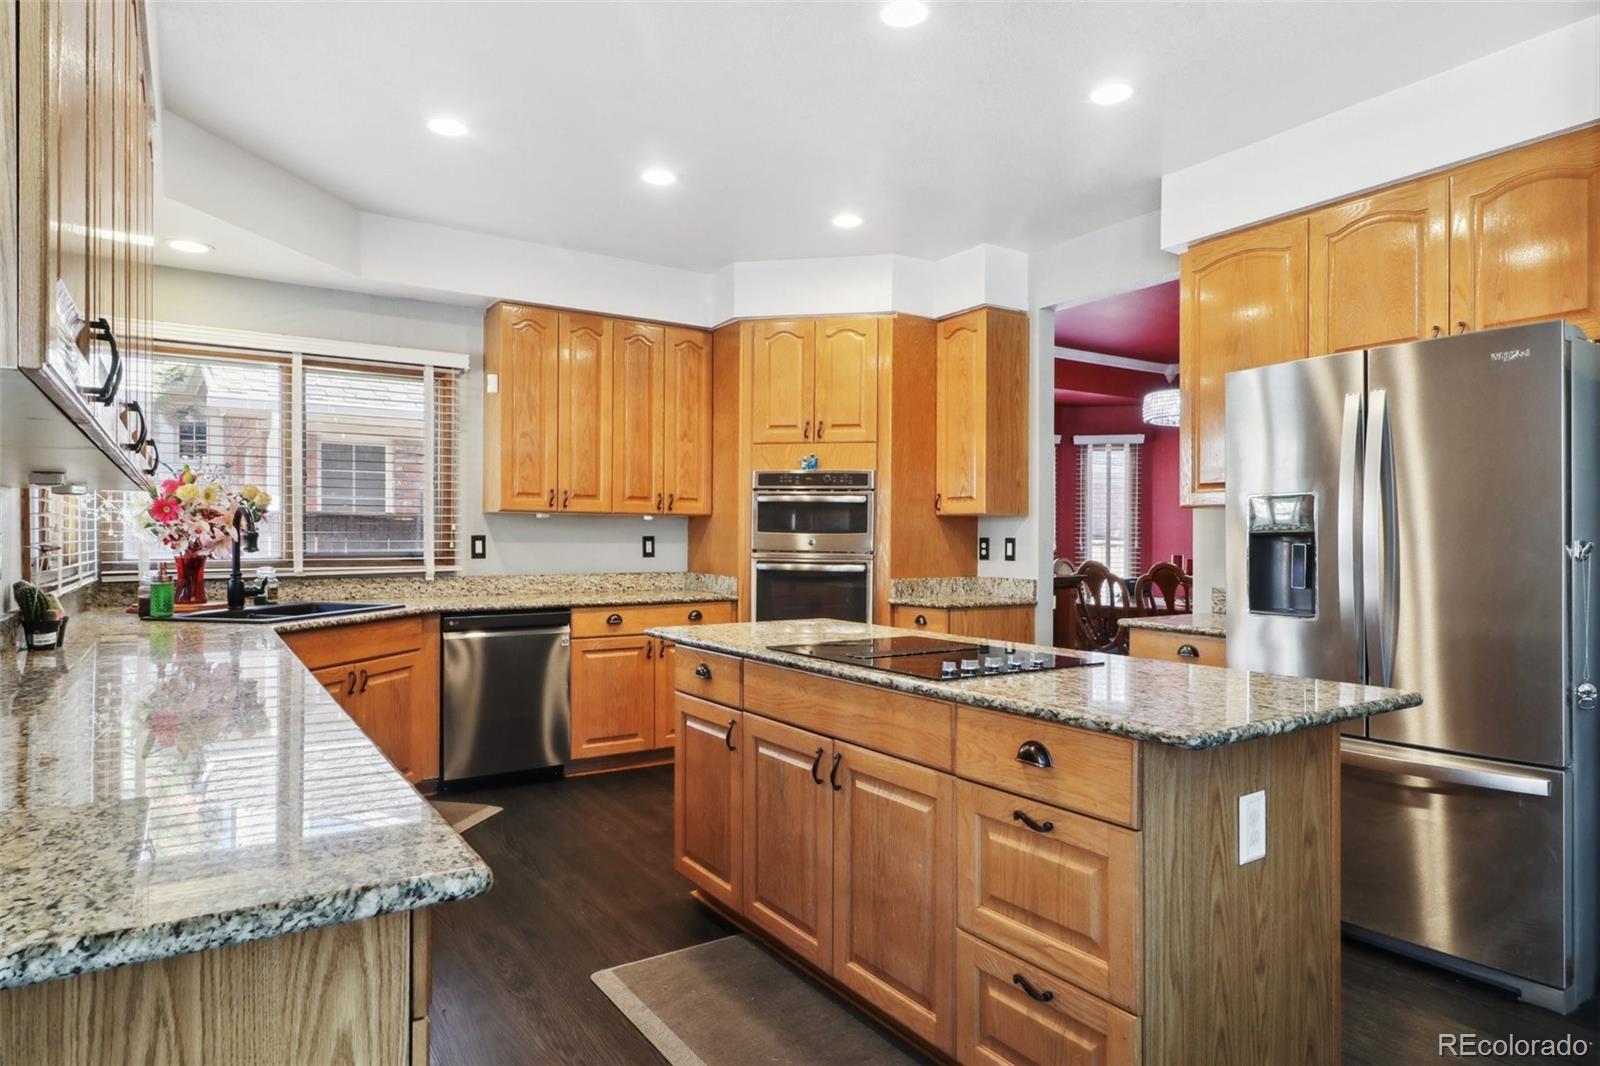 a kitchen with stainless steel appliances granite countertop refrigerator sink and cabinets